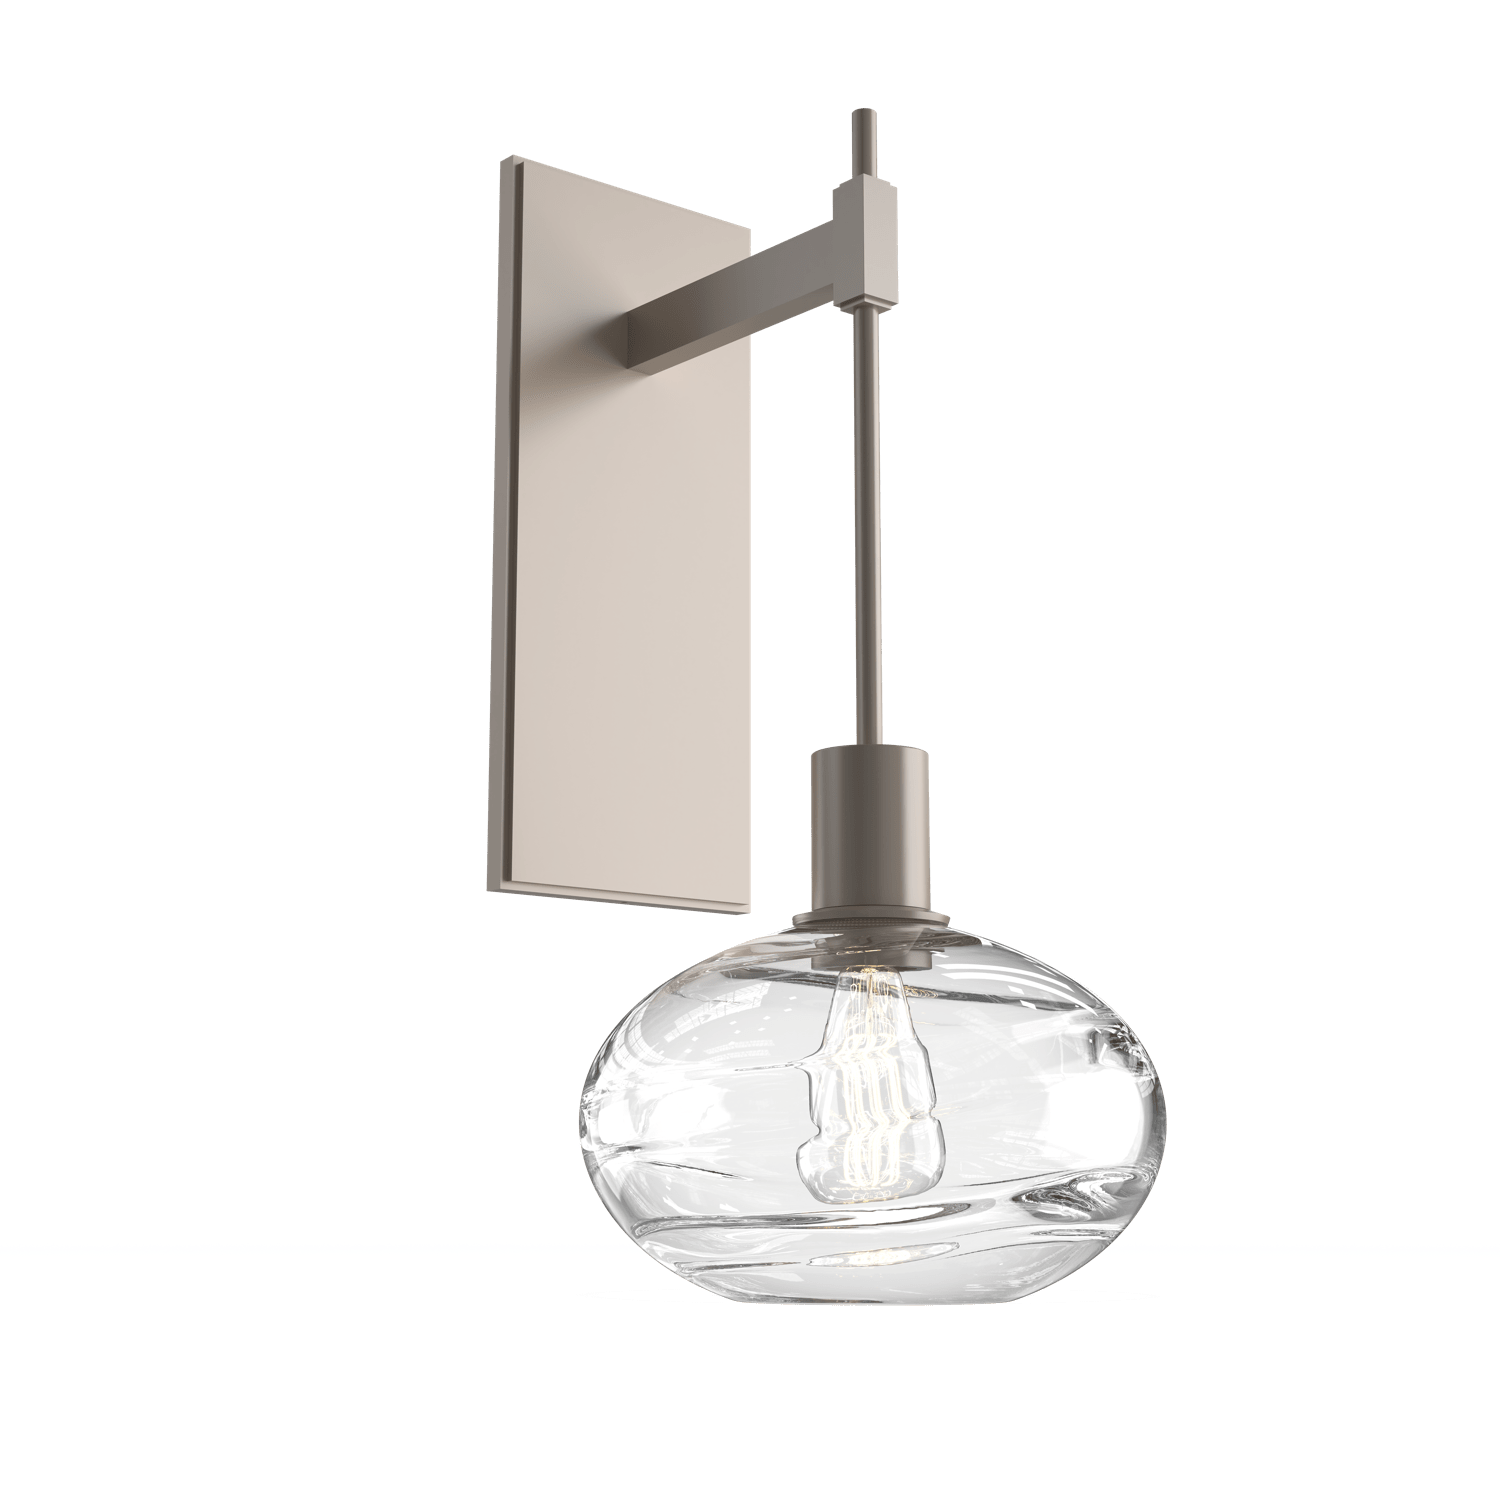 IDB0036-18-BS-OC-Hammerton-Studio-Optic-Blown-Glass-Coppa-tempo-wall-sconce-with-metallic-beige-silver-finish-and-optic-clear-blown-glass-shades-and-incandescent-lamping